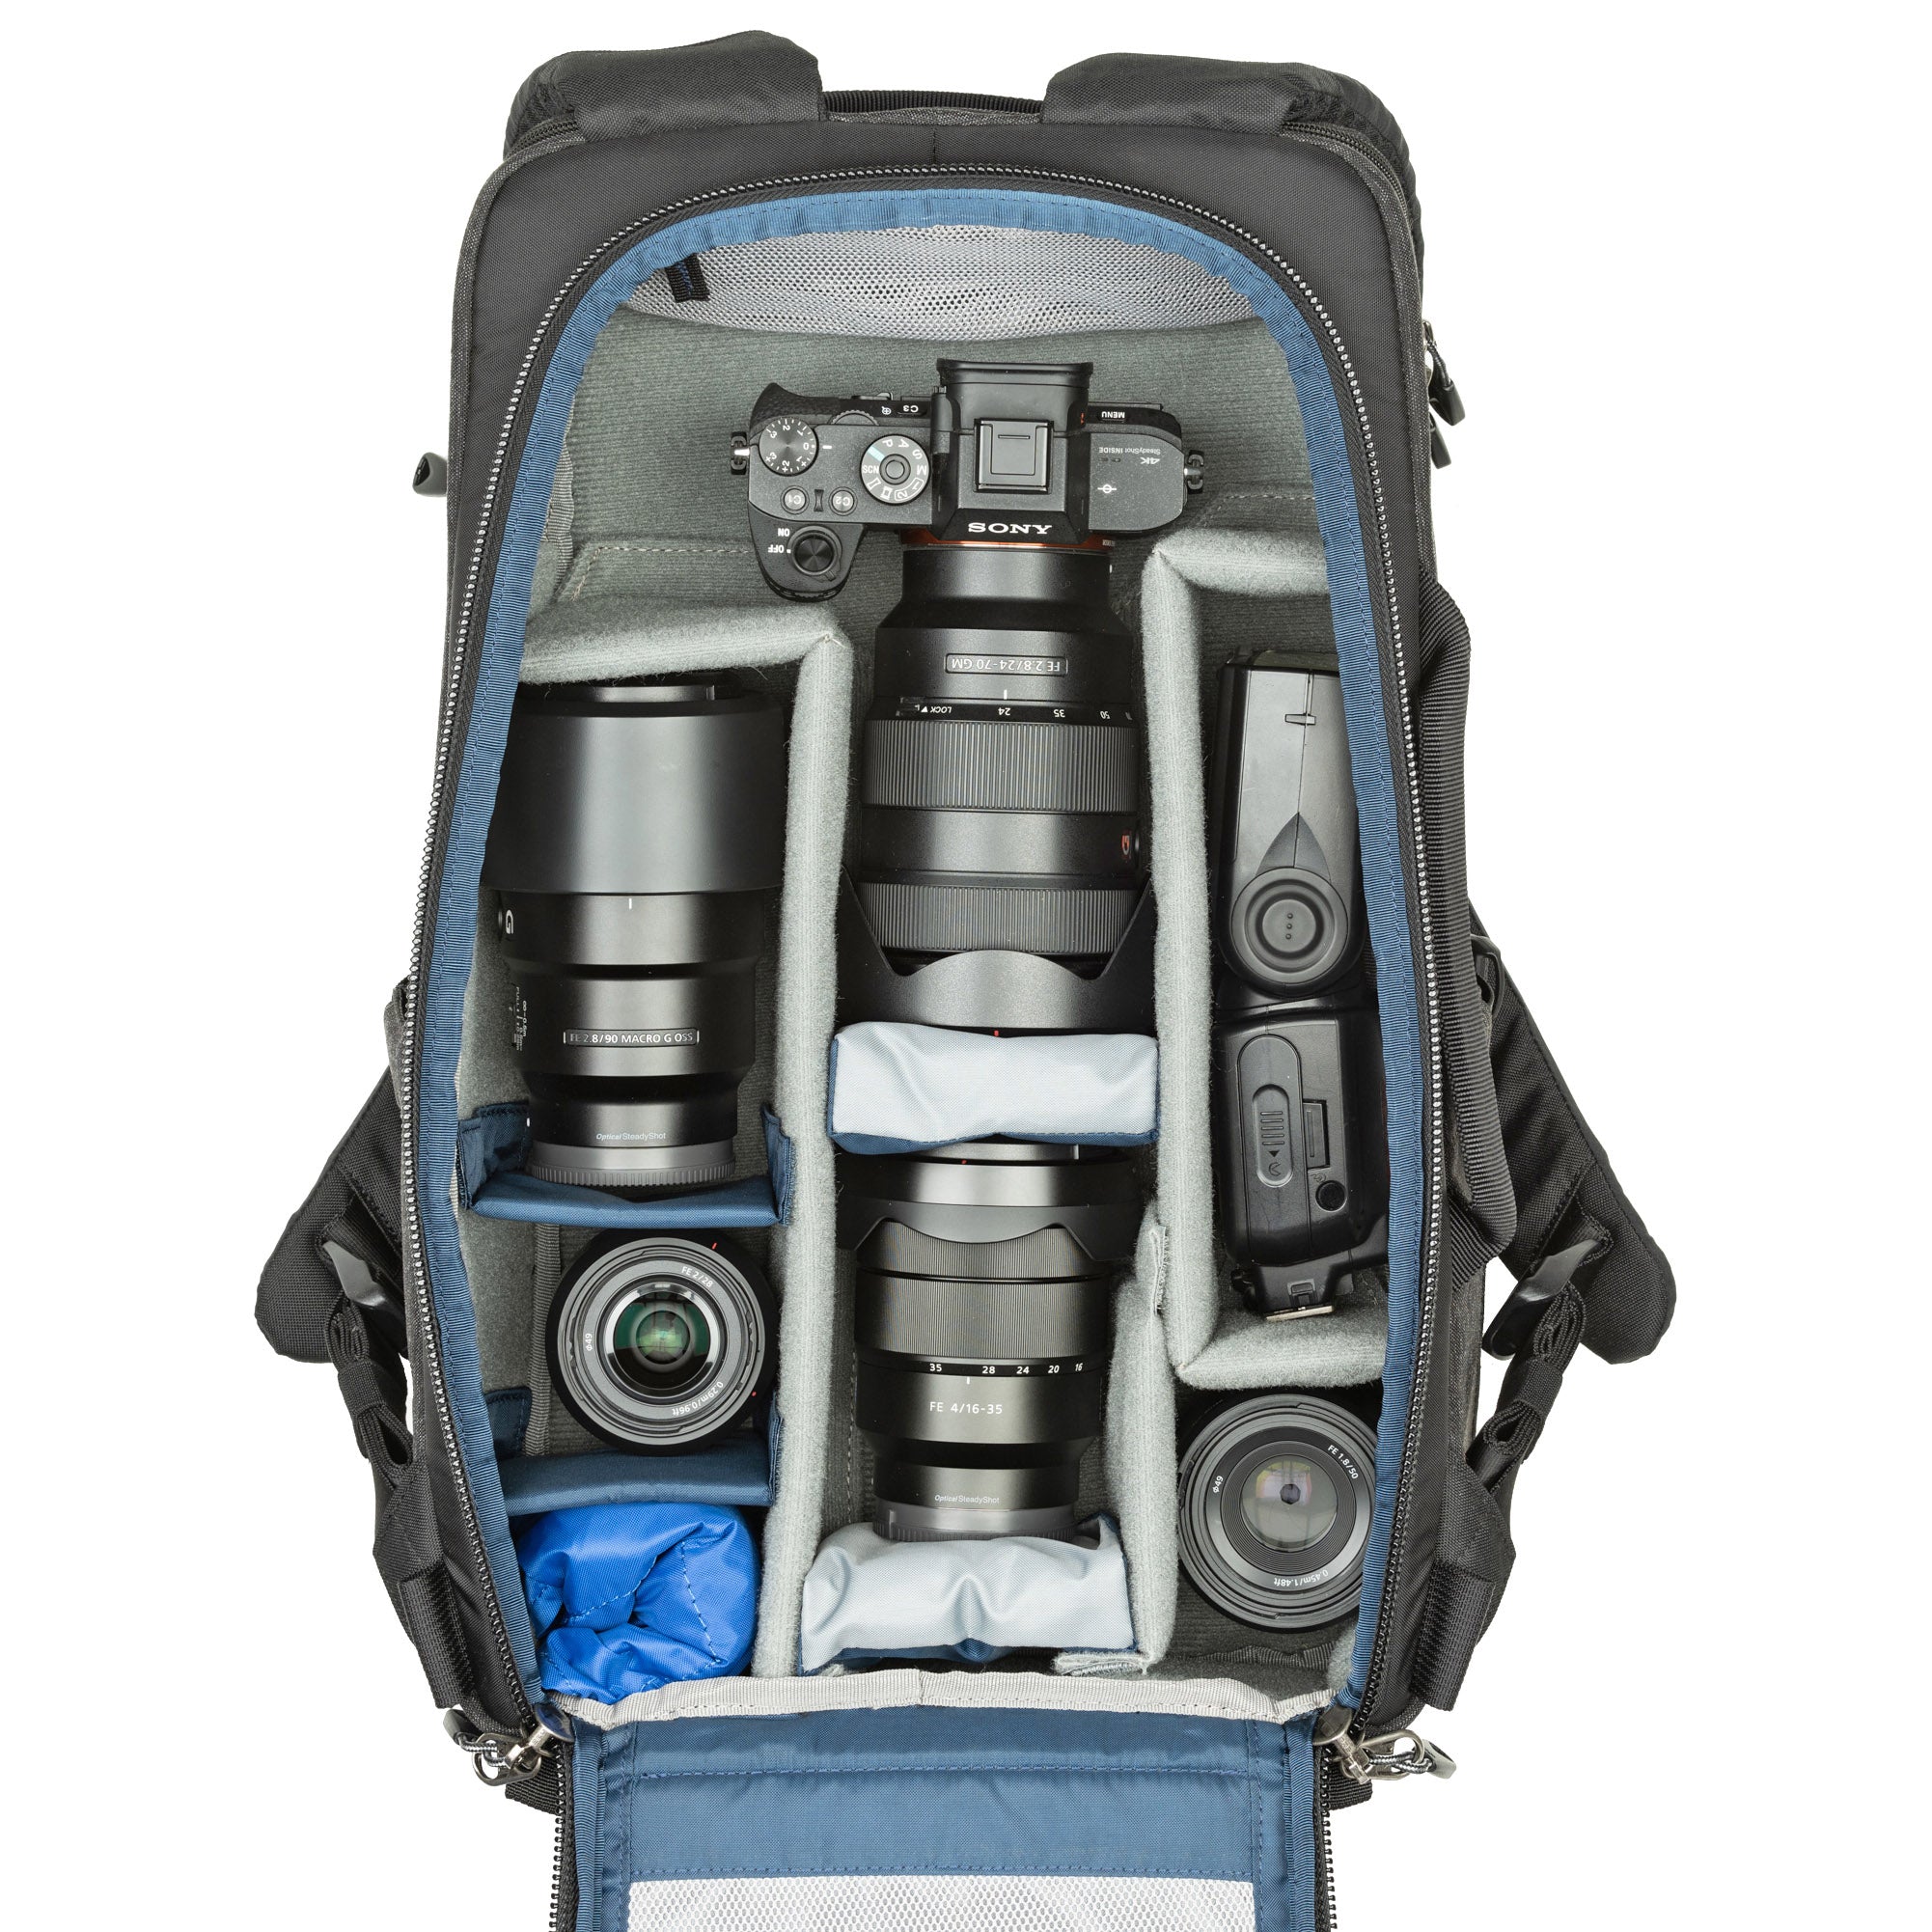 1–2 ungripped DSLR or Mirrorless bodies with lens attached up to a 70–200mm f/2.8, 2–5 additional lenses, a strobe, a 16” laptop, plus personal gear